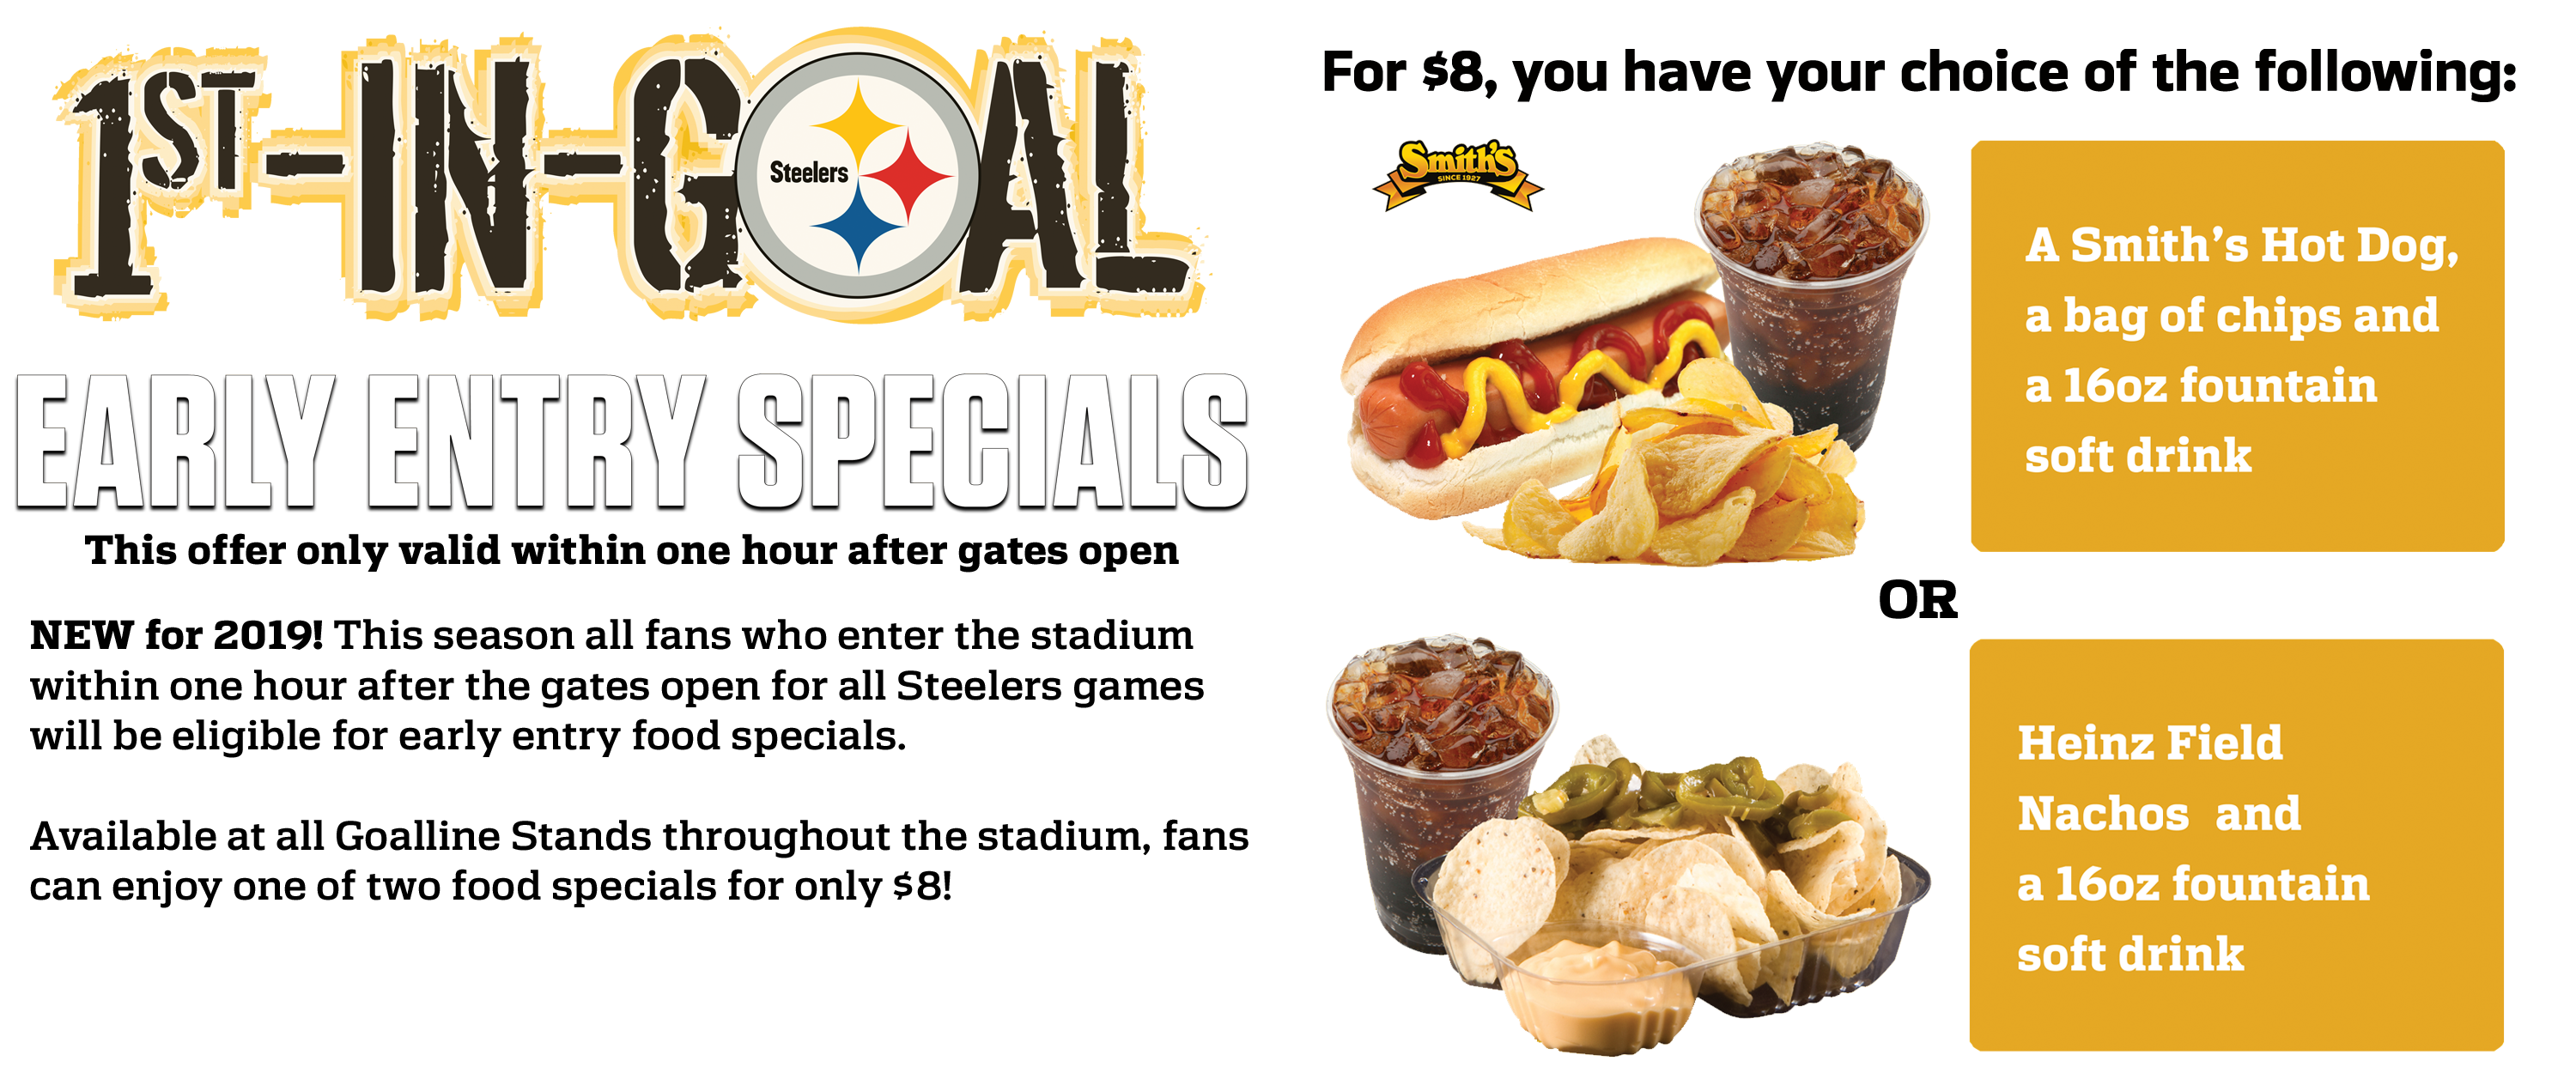 Pittsburgh Steelers vs. Indianapolis Colts ⋆ Heinz Field in Pittsburgh, PA